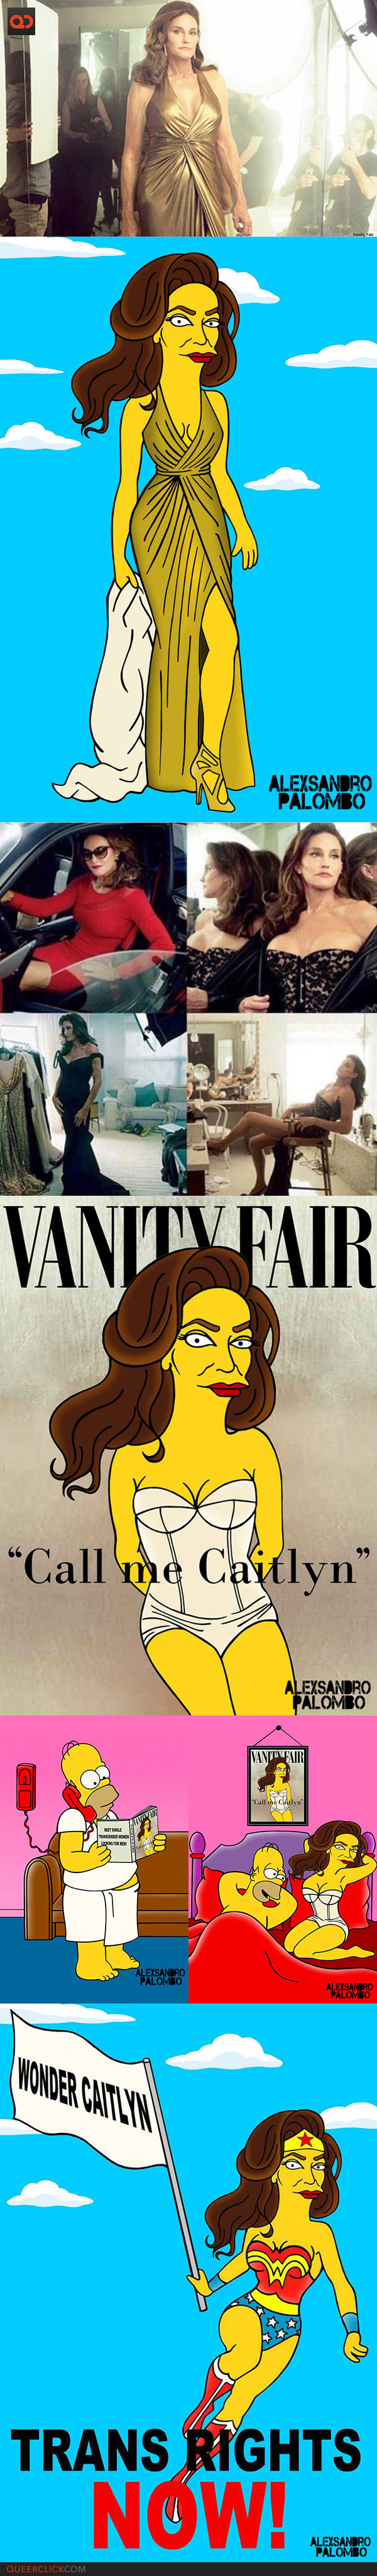 QC Open Forum: The Caitlyn Jenner Halloween Costumes, Right Or Wrong?